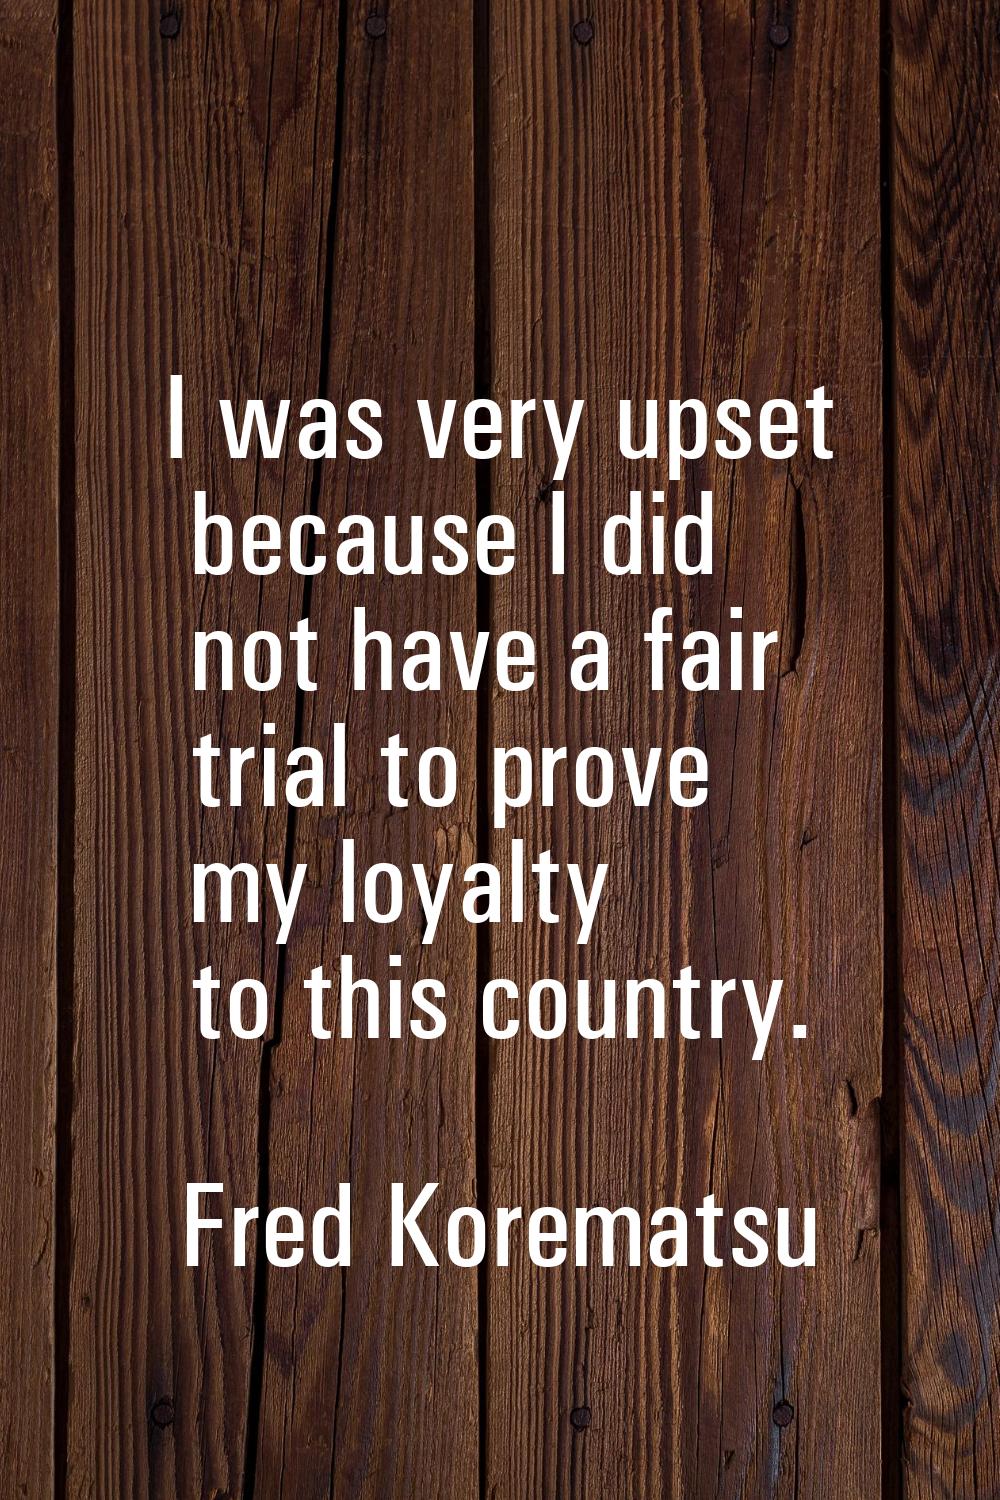 I was very upset because I did not have a fair trial to prove my loyalty to this country.